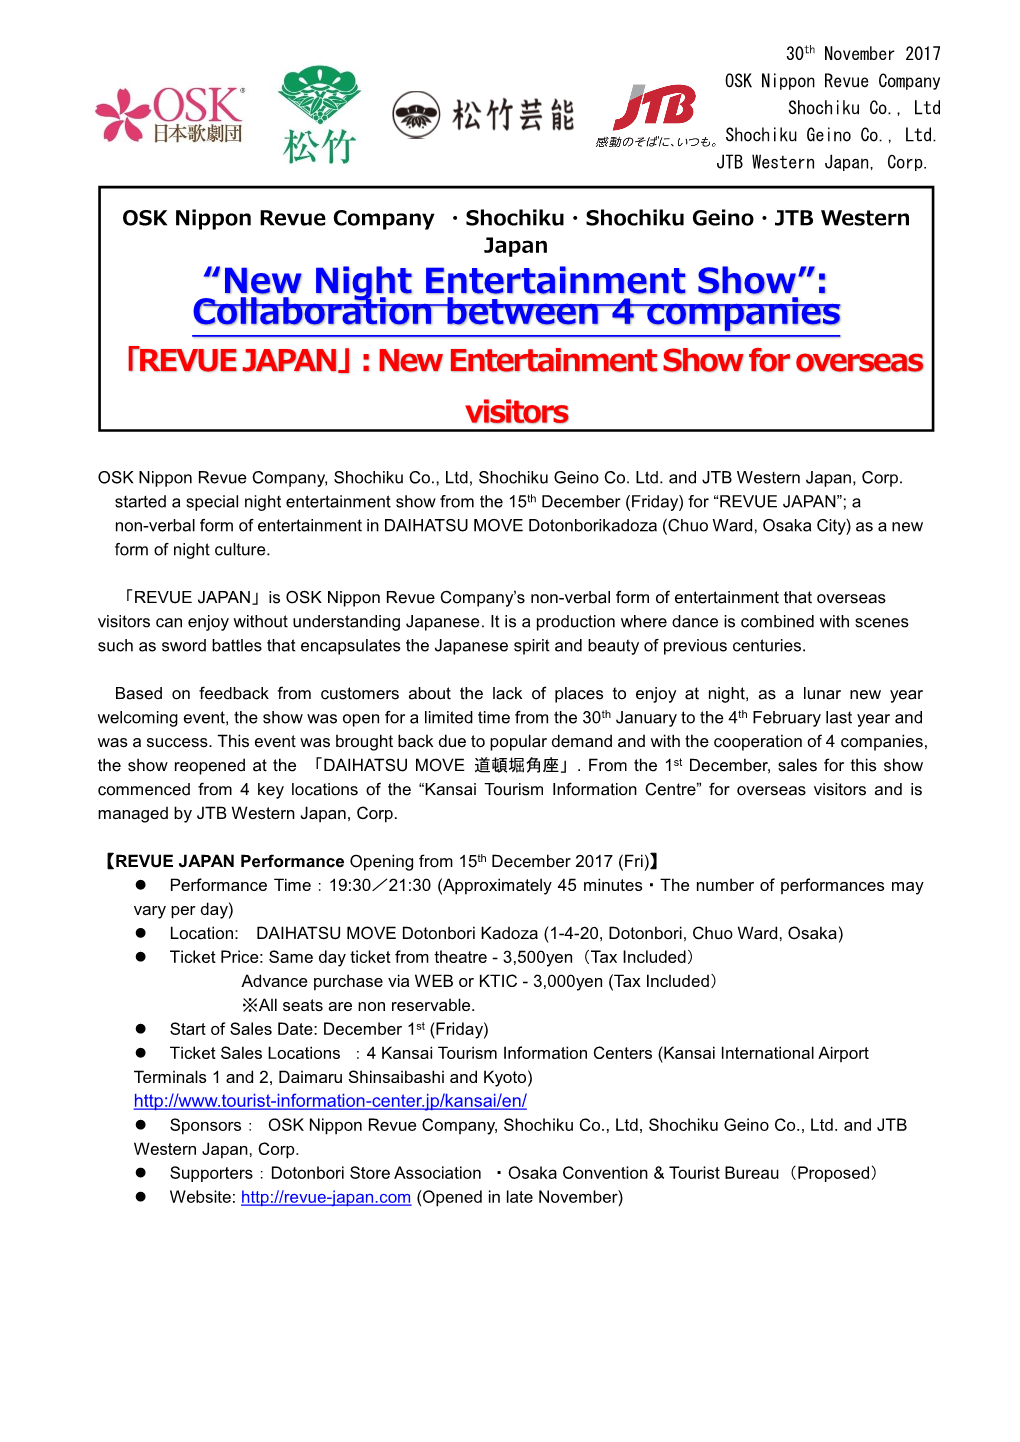 REVUE JAPAN」: New Entertainment Show for Overseas